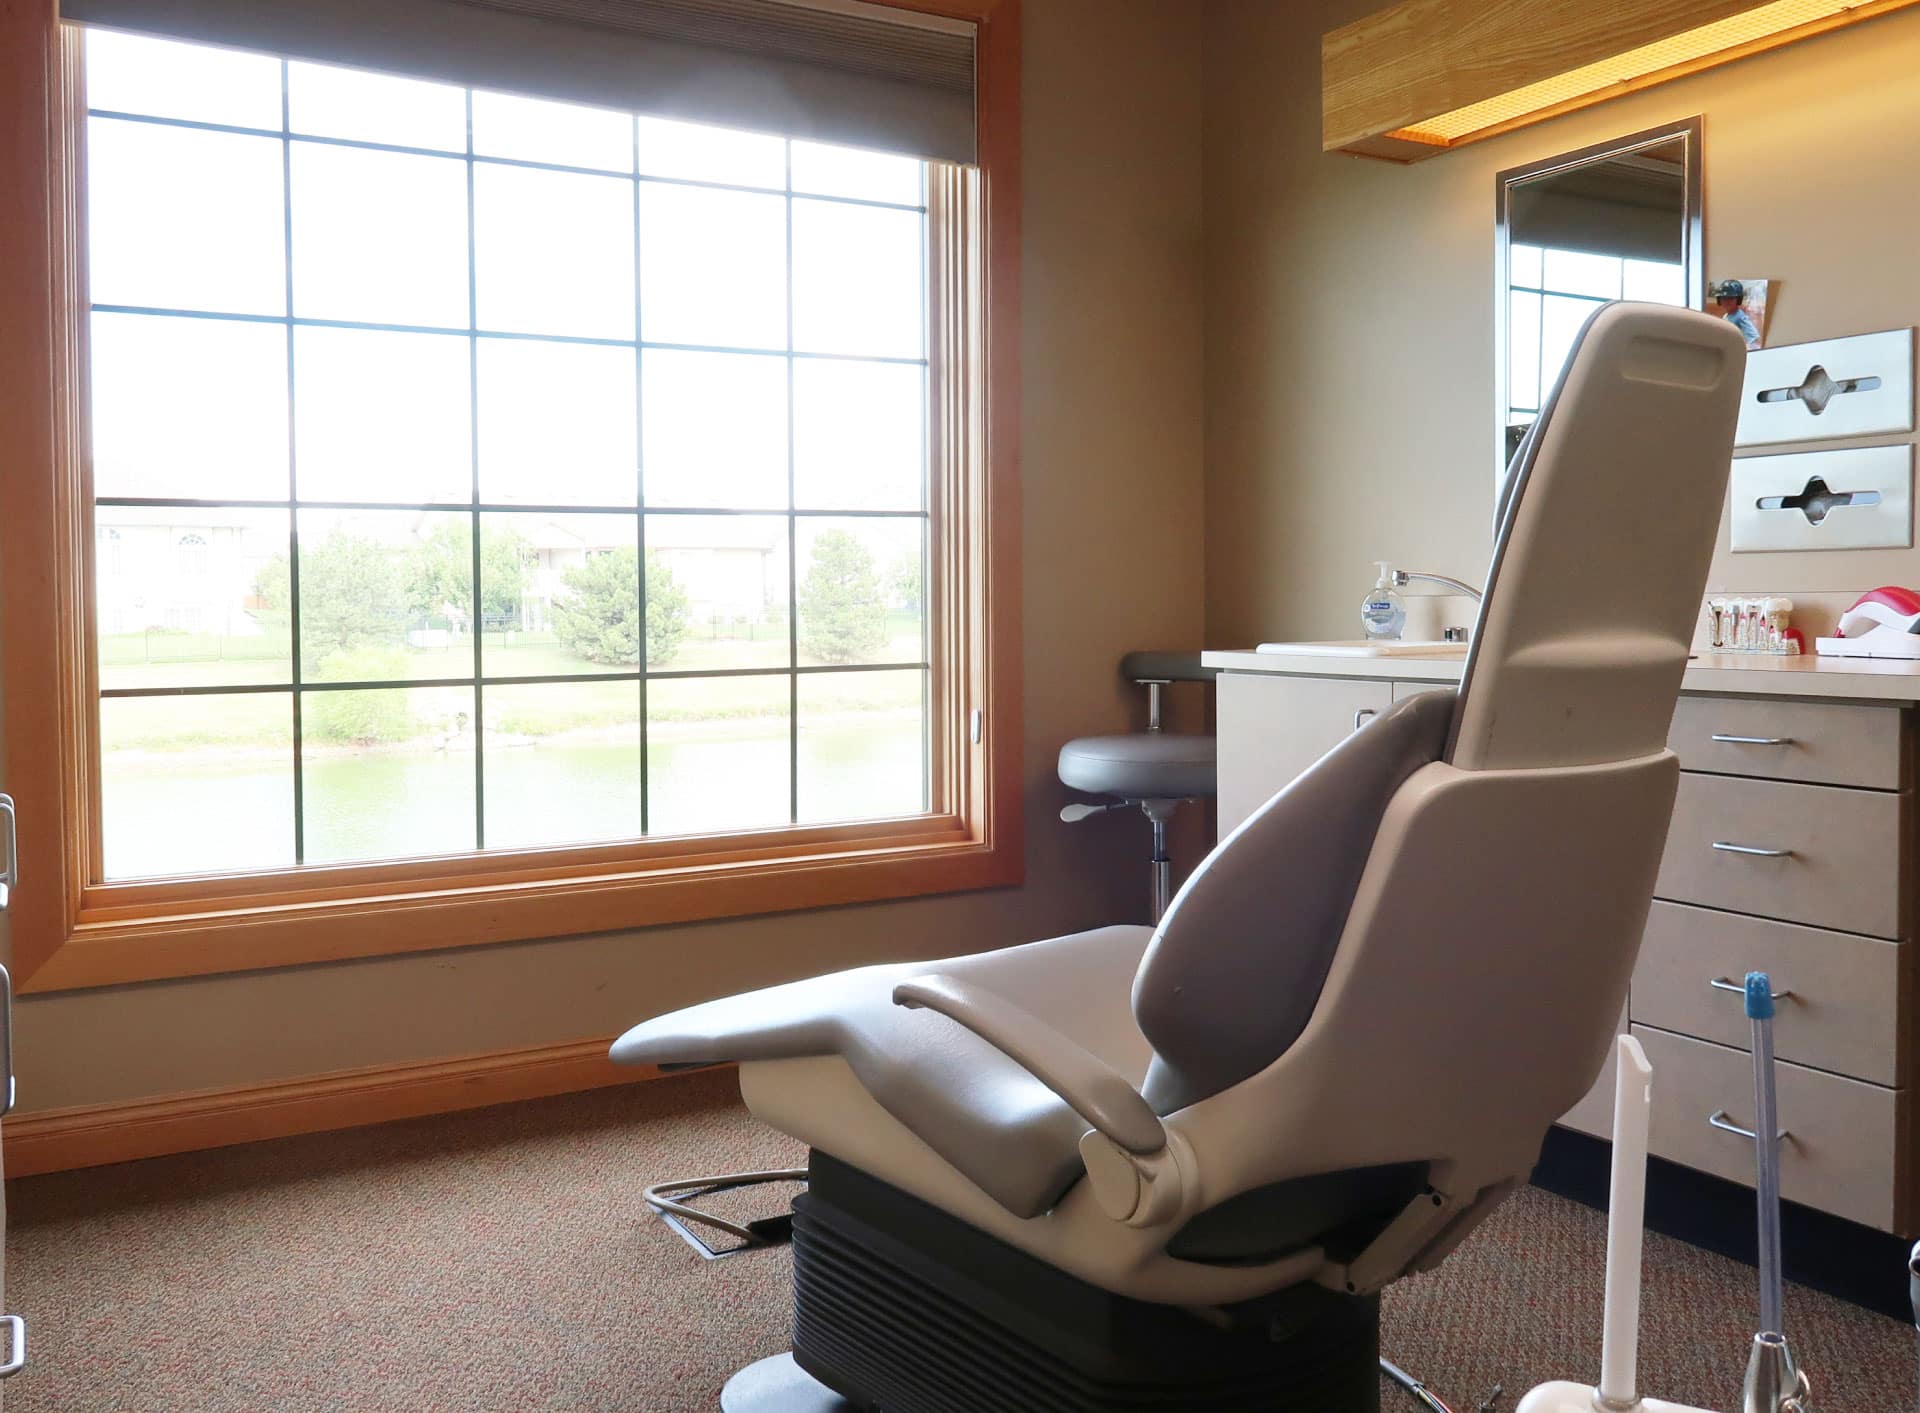 dental exam room with dental chair facing large window looking outside